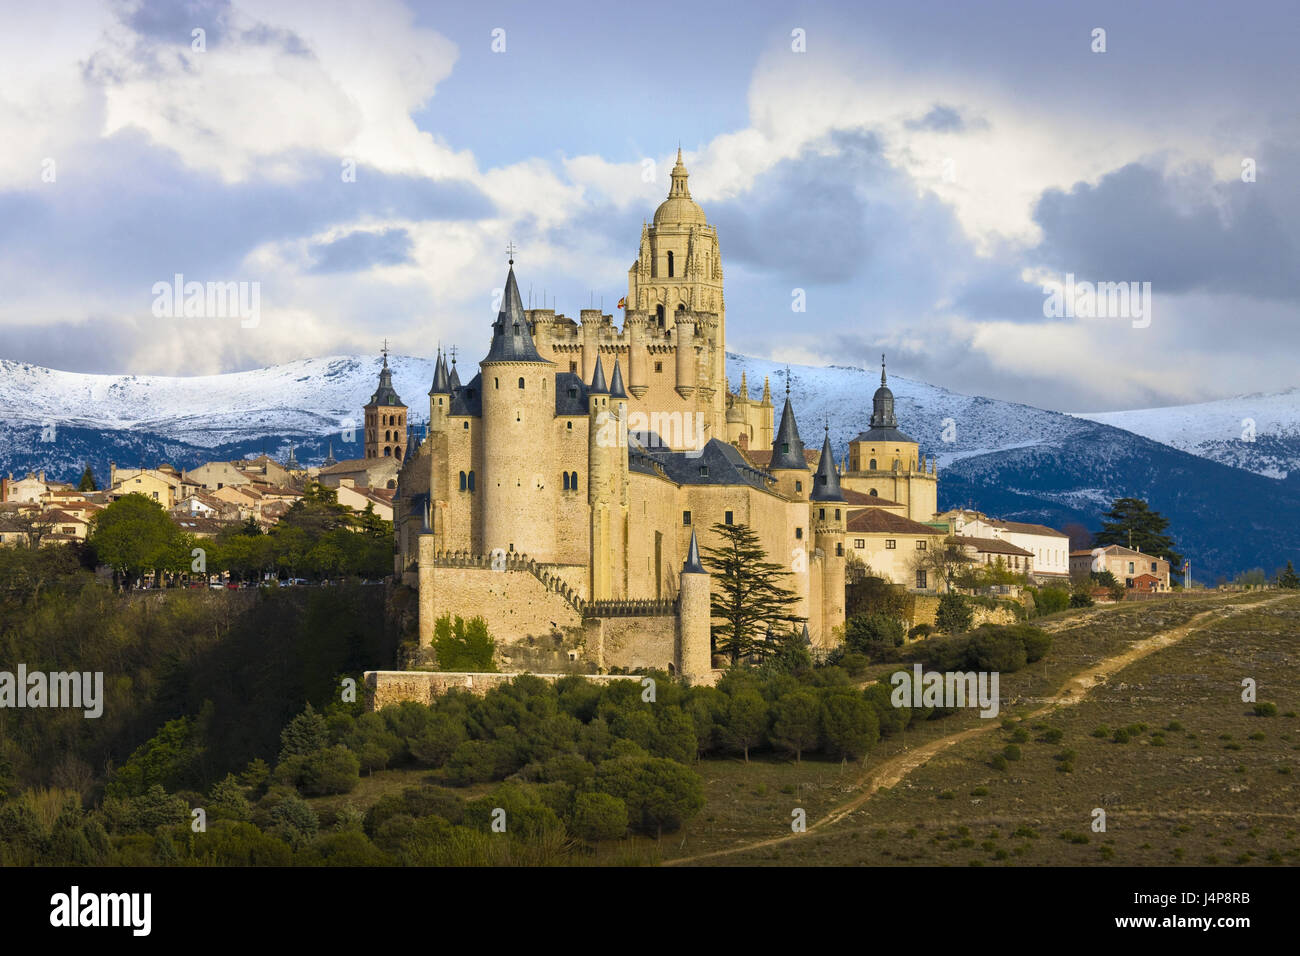 Spain, Castile, Segovia, lock, cathedral, Kastilien-Leon, building, structures, castle, church, architecture, houses, residential houses, place of interest, tourism, mountain, snow, sky, clouds, Stock Photo